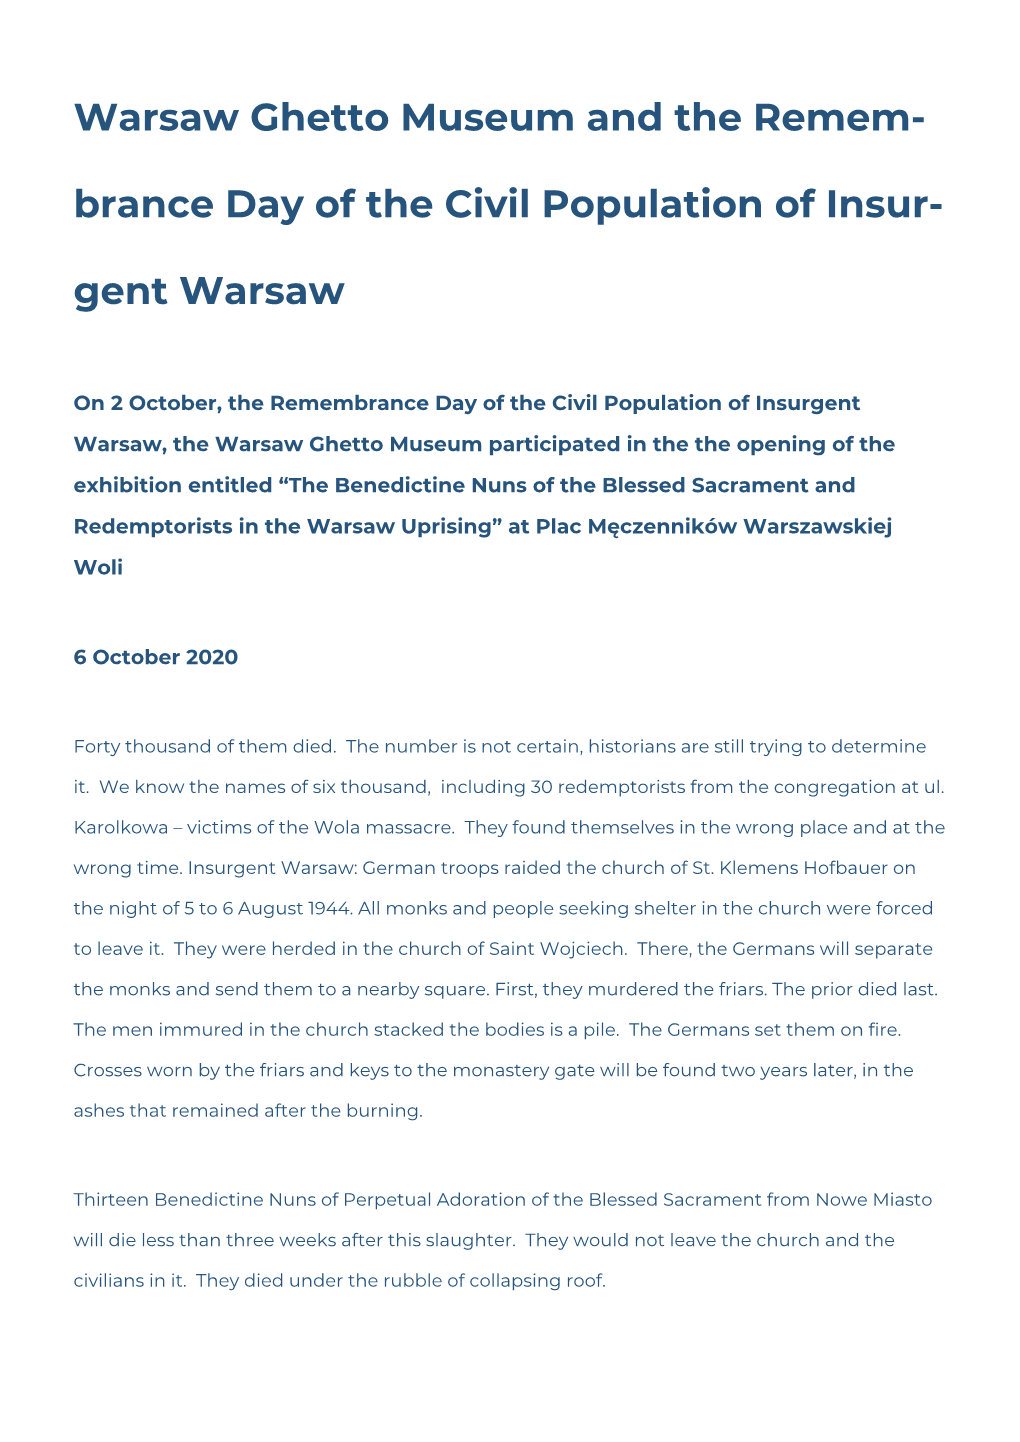 Warsaw Ghetto Museum and the Remem- Brance Day of the Civil Population of Insur- Gent Warsaw